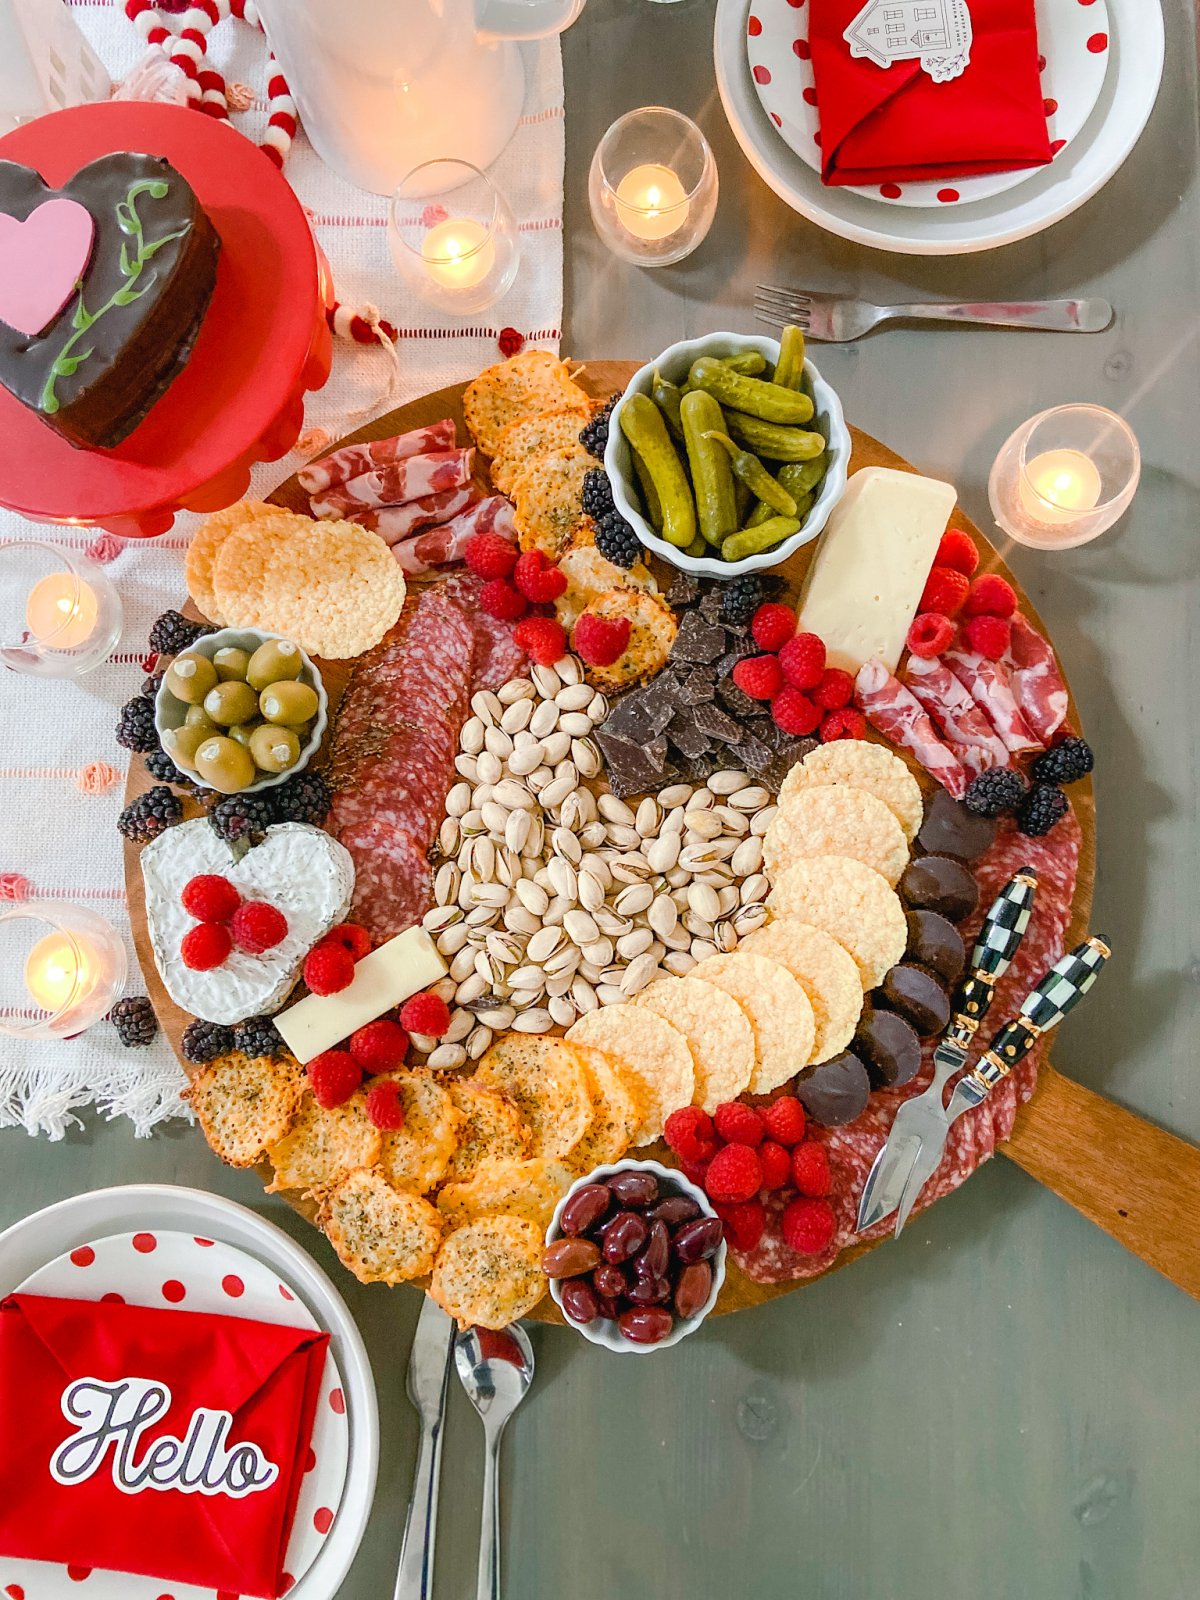 The Easiest Low-Carb Keto Charcuterie Board. Enjoy low-carb snacks for Valentine’s Day with these delicious nibbles that are also keto-friendly!